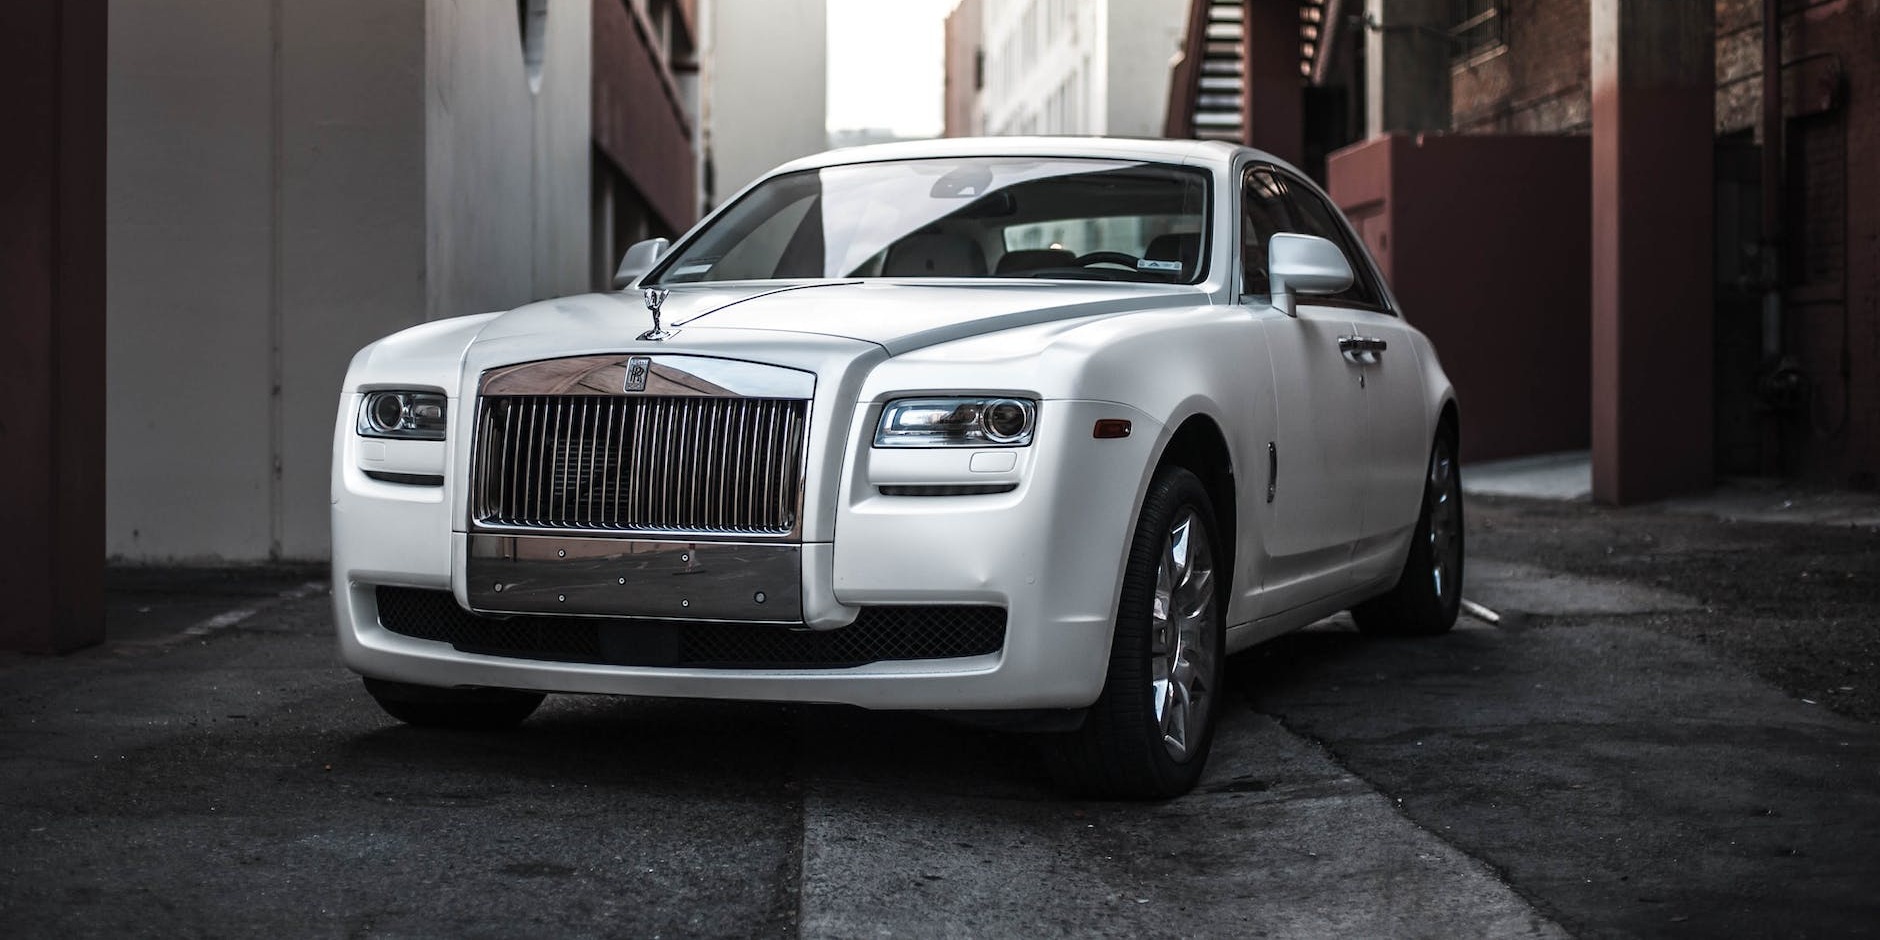 What Sets the Rolls Royce Ghost Apart for Luxury Travel in the UK?